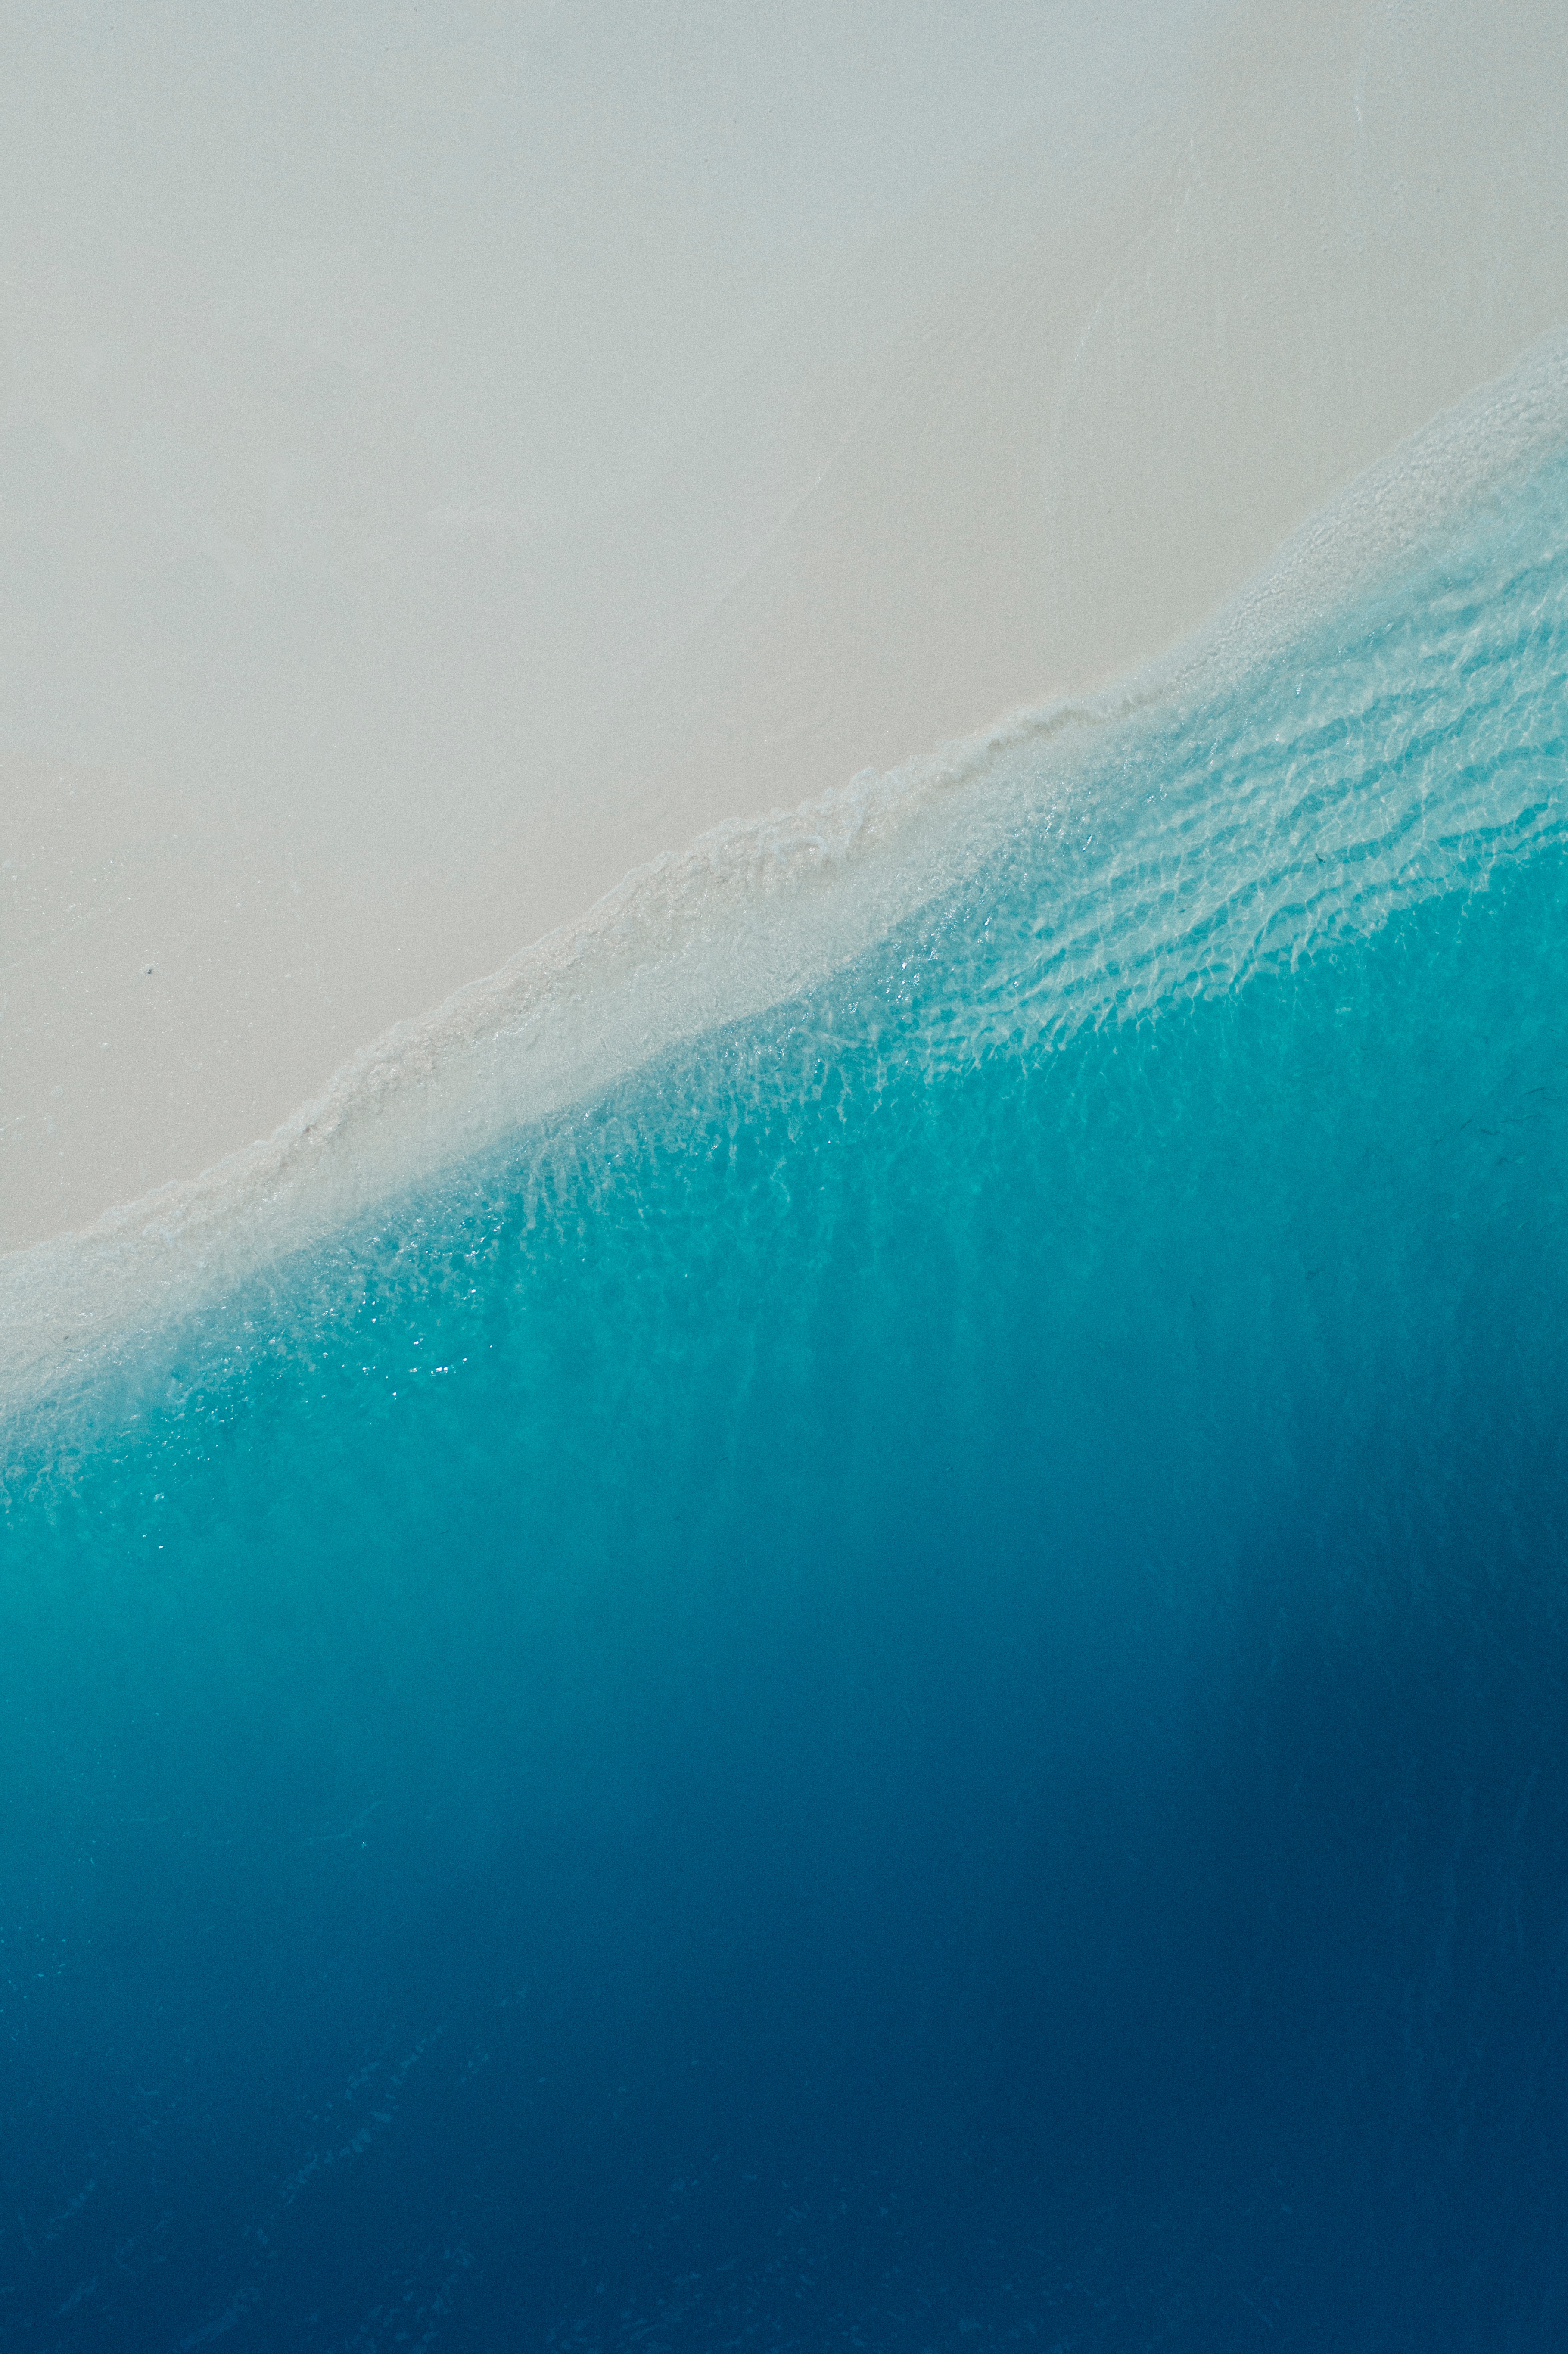 102126 download wallpaper nature, water, beach, view from above, ocean, surf screensavers and pictures for free